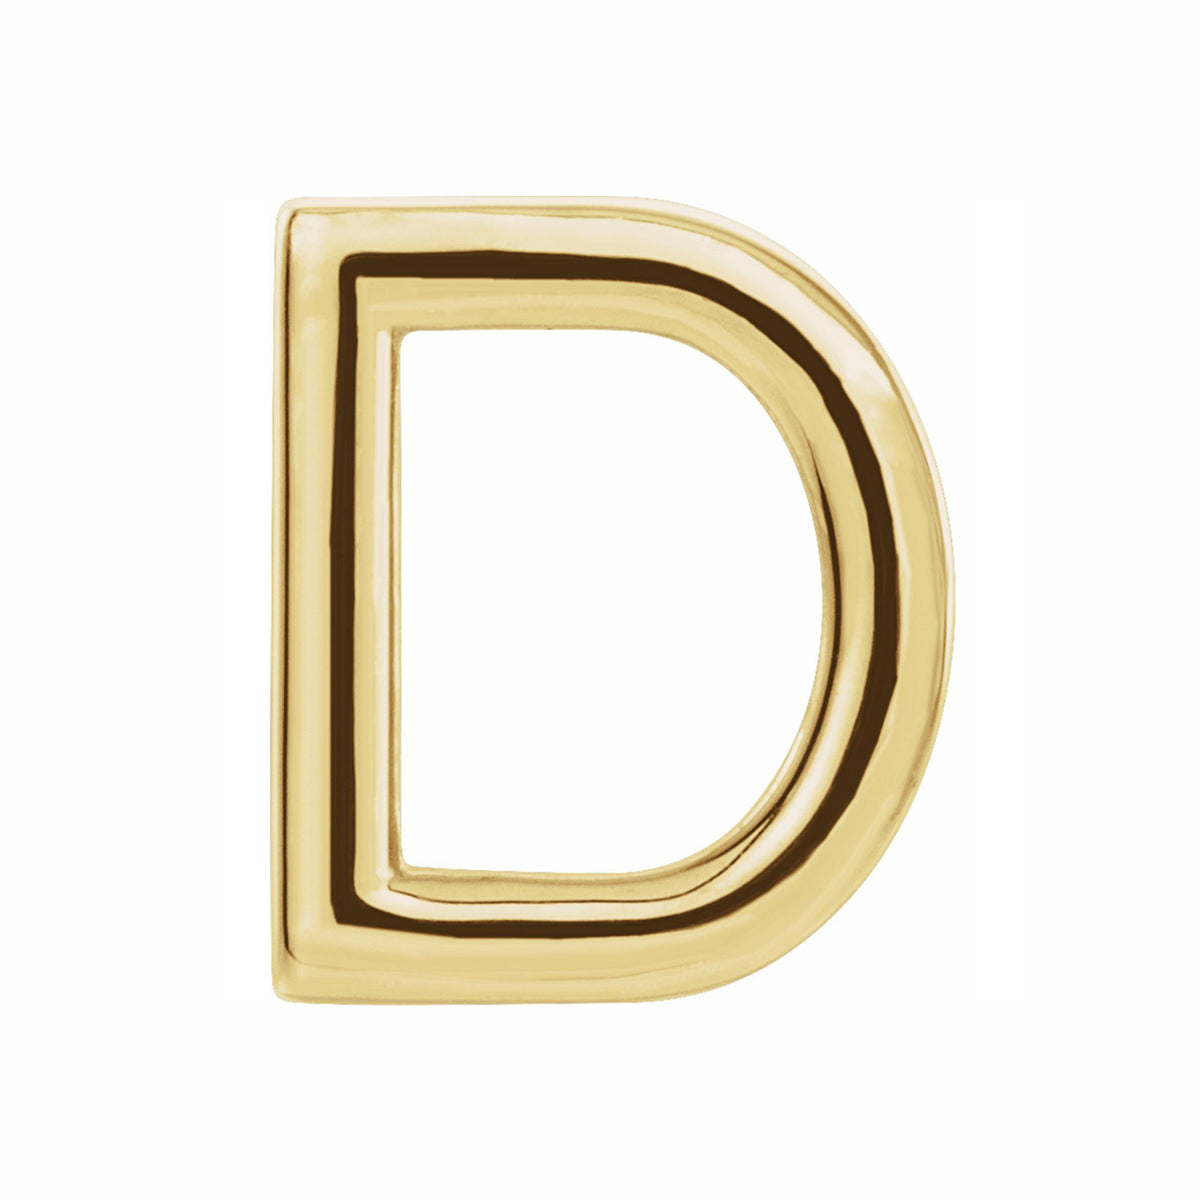 Single, 14k Yellow Gold Initial D Post Earring, 7 x 8mm, Item E18498-D by The Black Bow Jewelry Co.